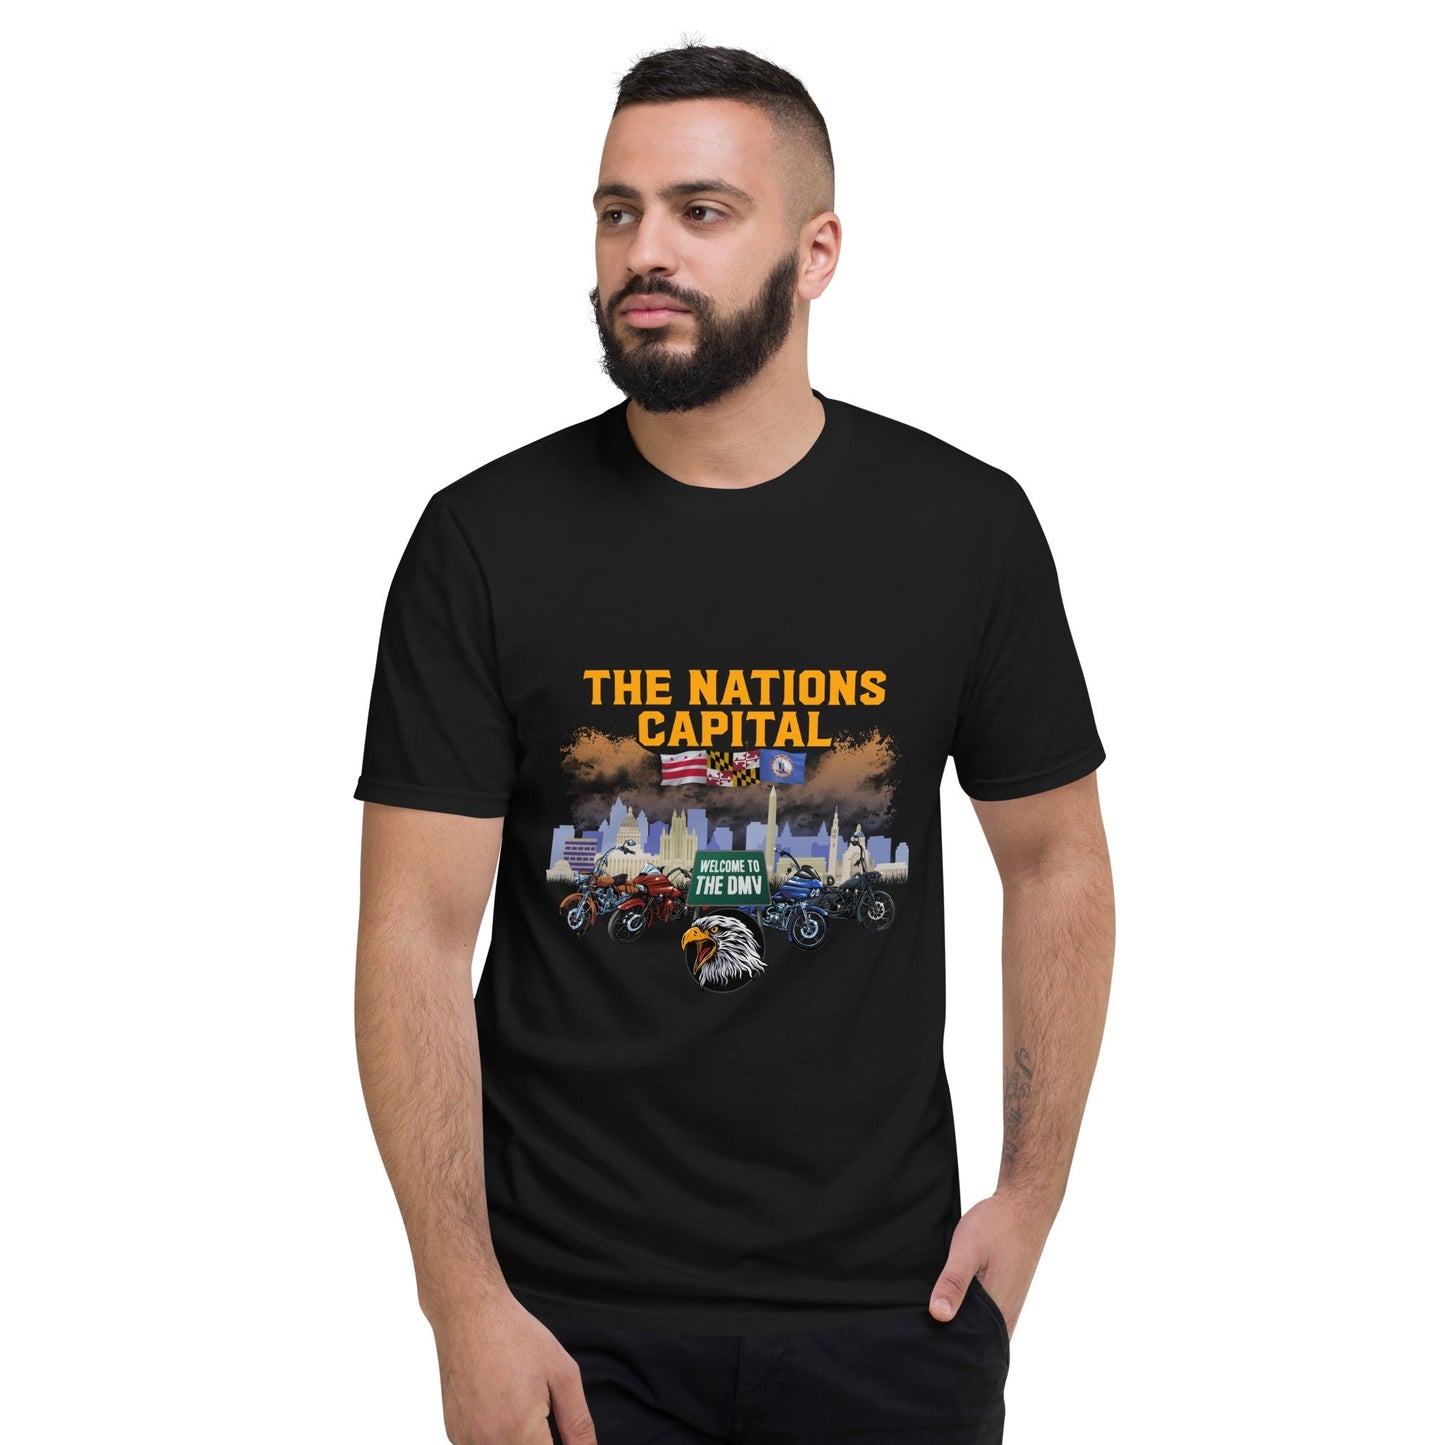 The Nations Capital - Front